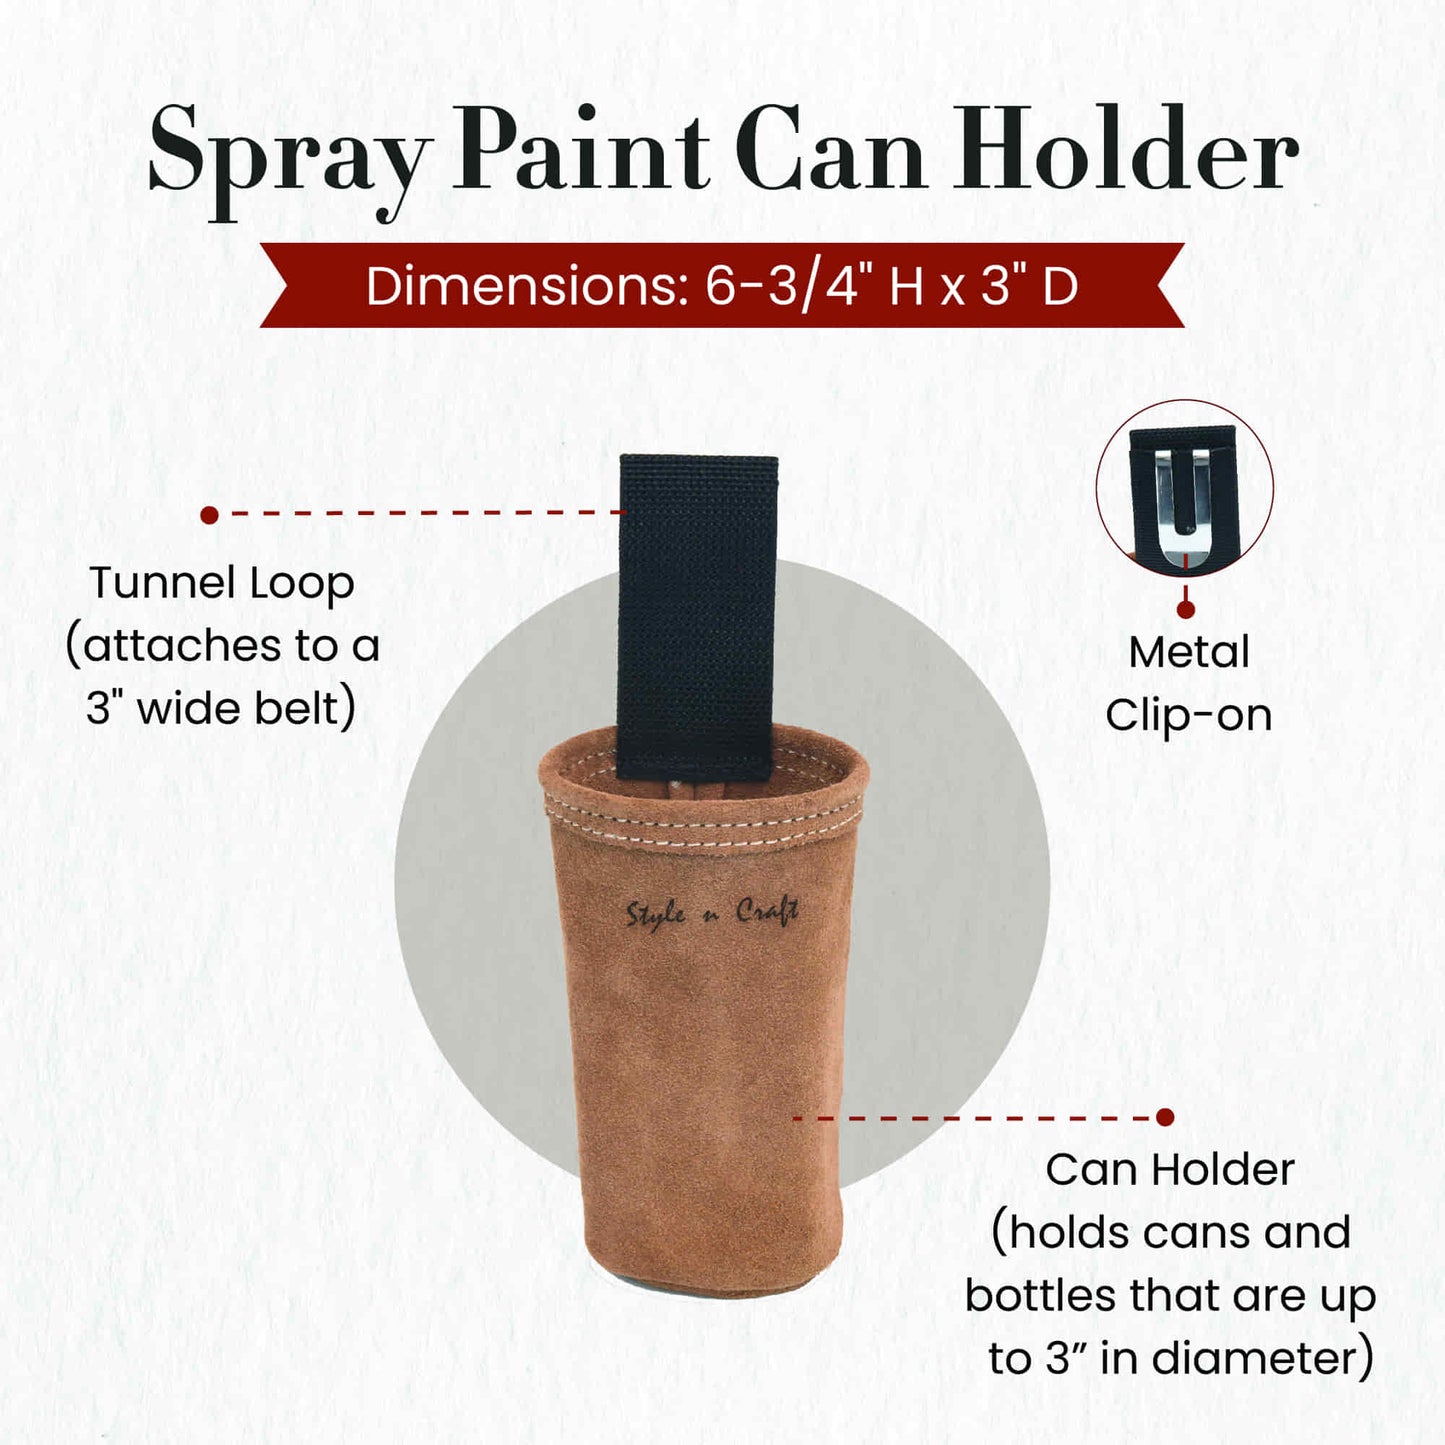 Style n Craft 88022 - Spray Paint Can Holder in Heavy Duty Suede Leather in Dark Tan Color - front view showing details